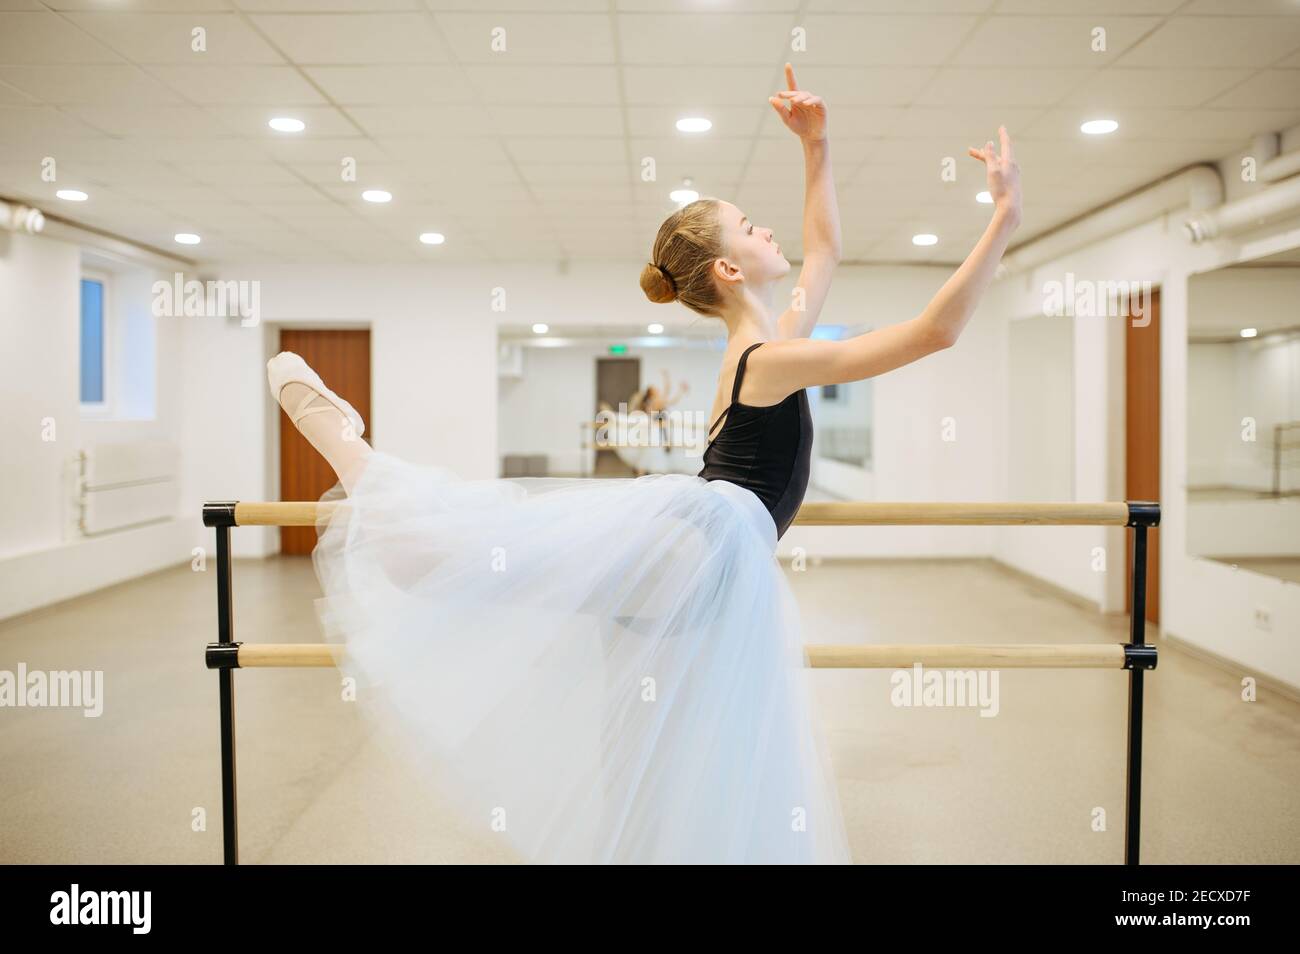 Elegant young ballerina rehearsing at the barre Stock Photo